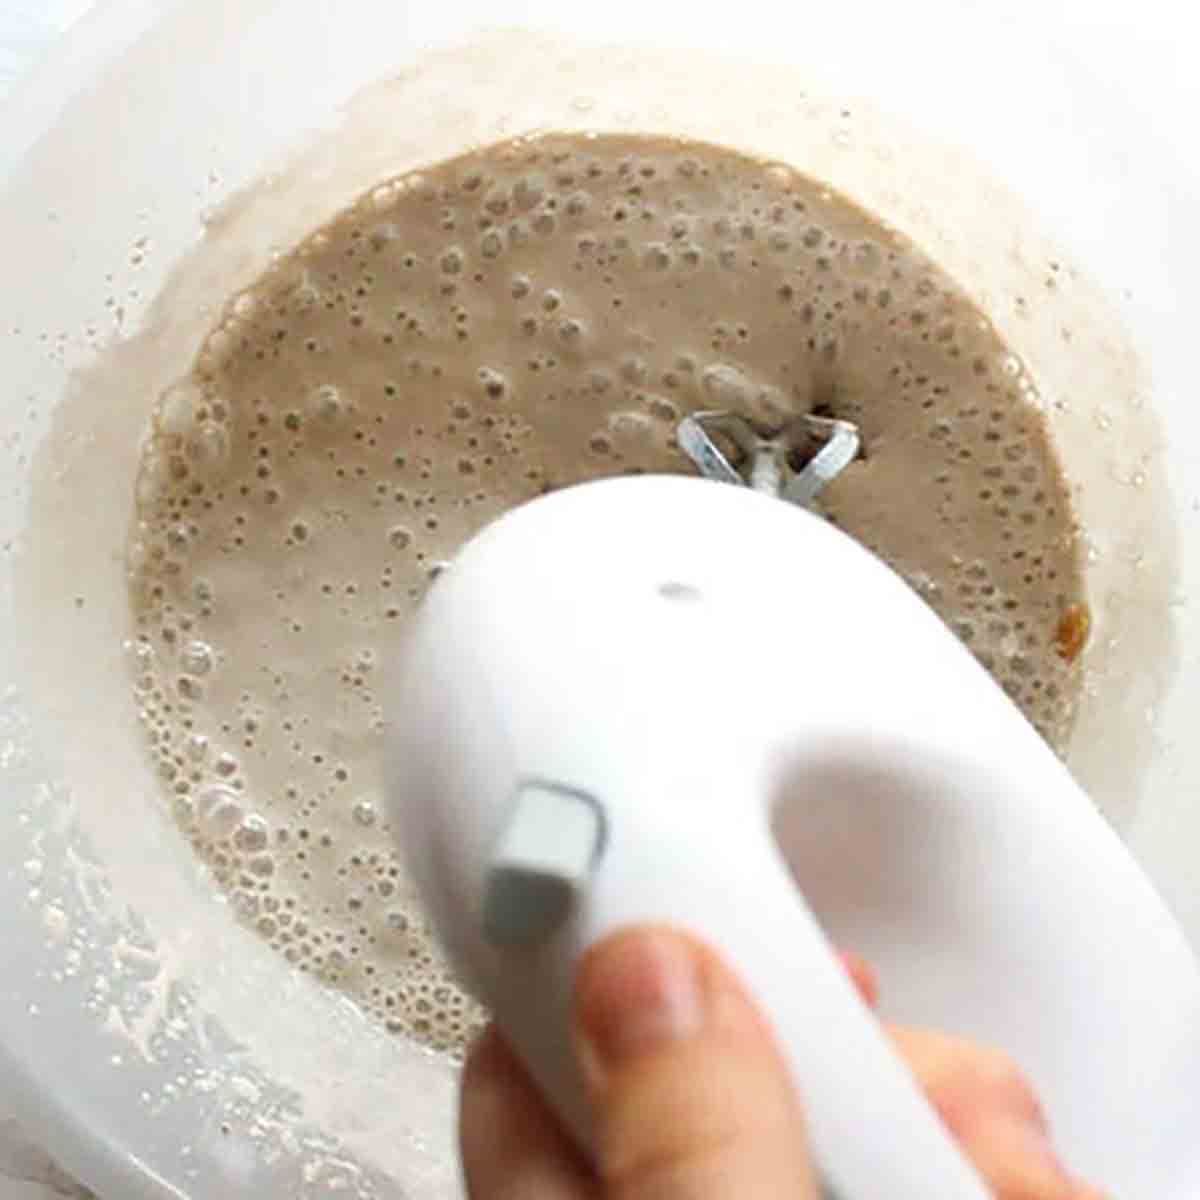 Whisking The Ice Cream Mixture In A Bowl